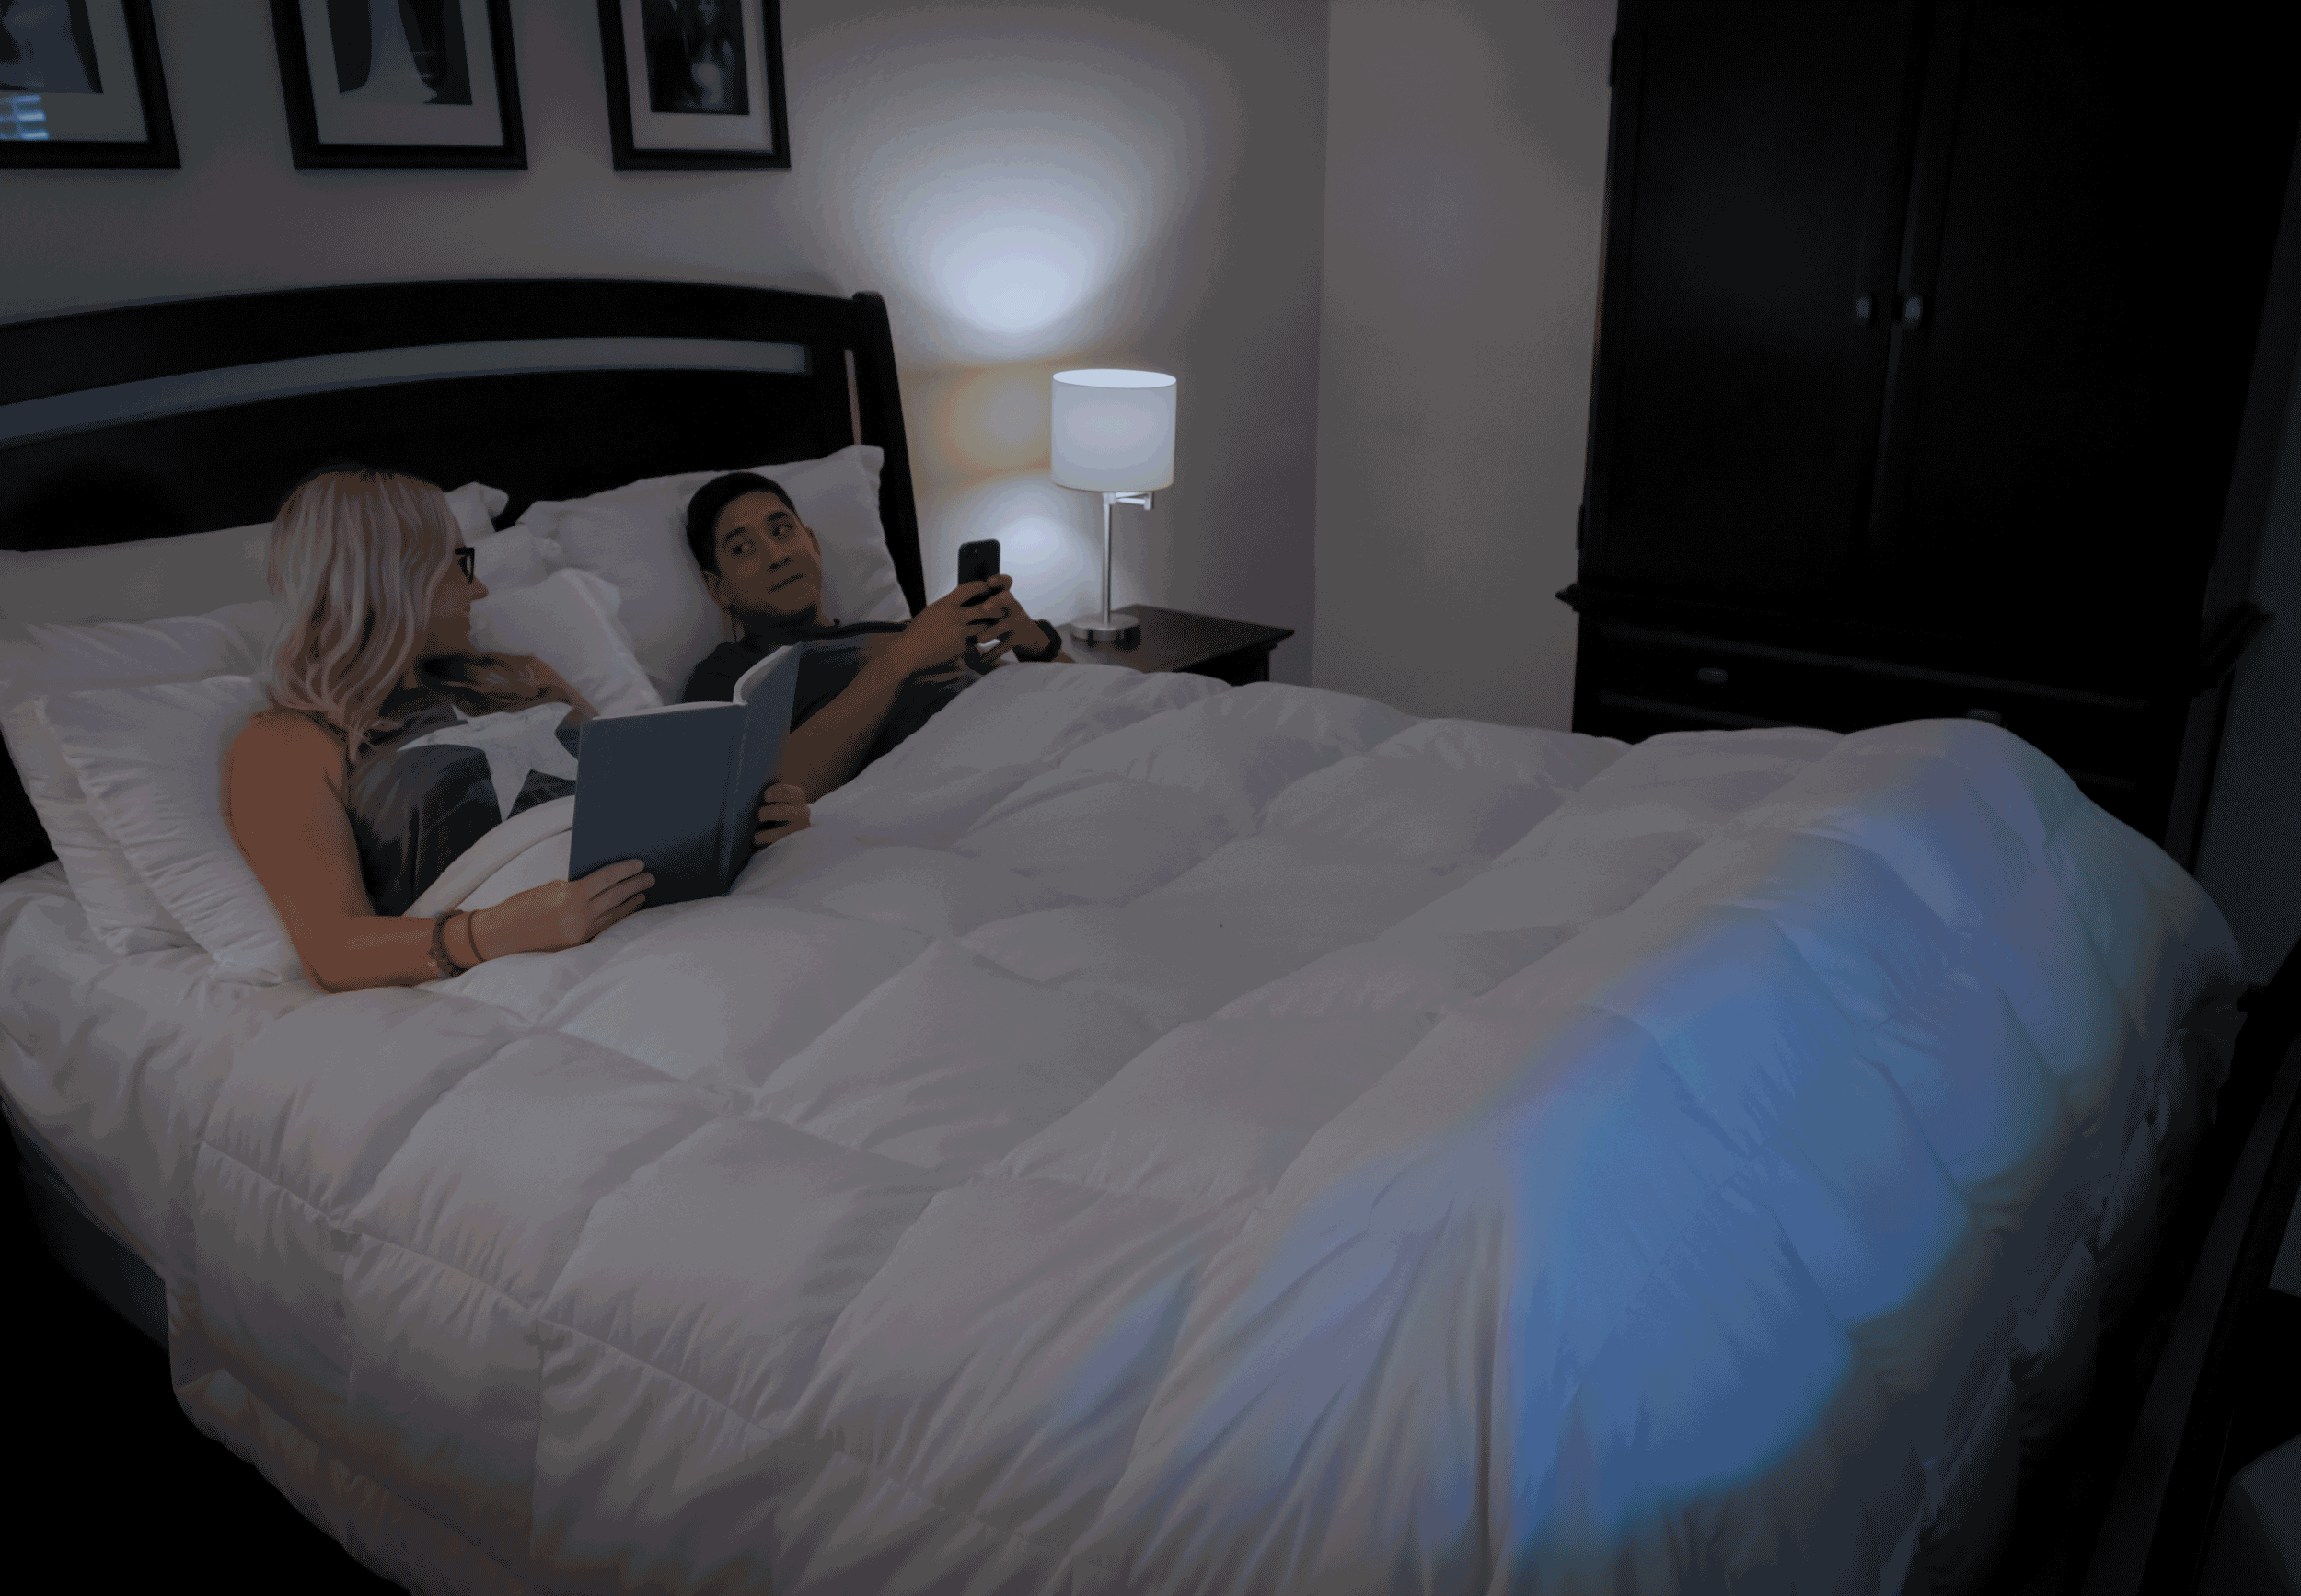 Couple in bed, bed block bed wedges lifting covers